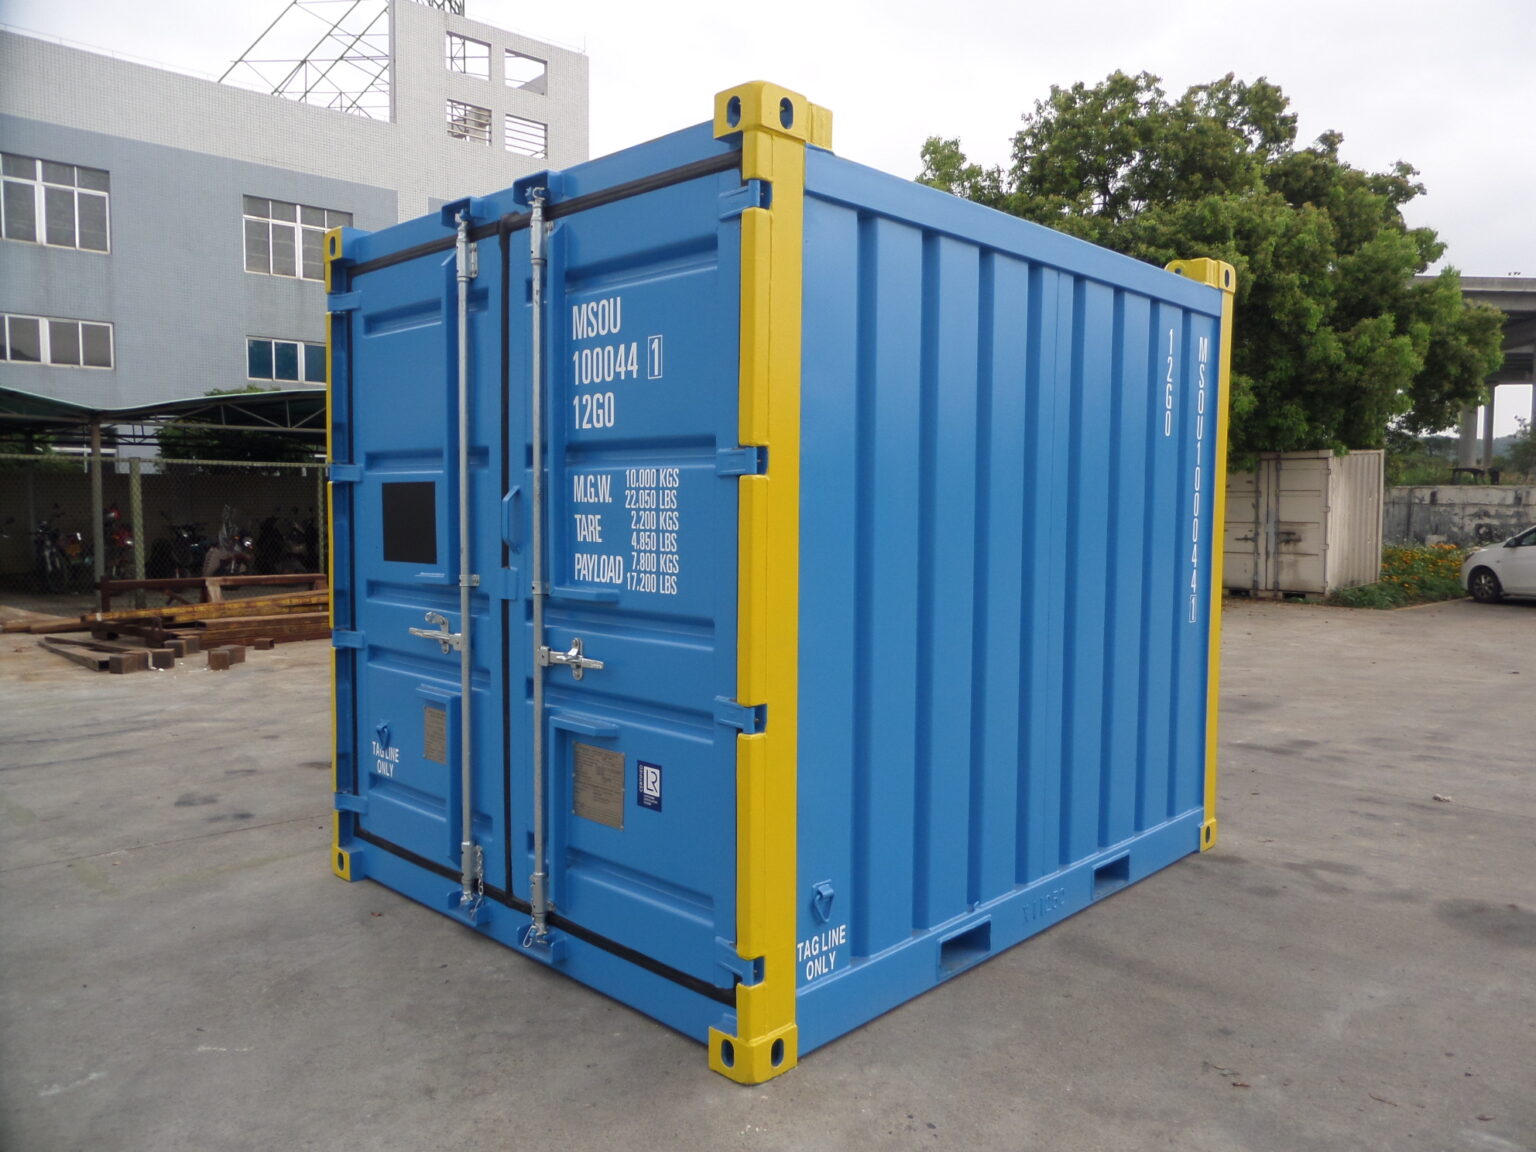 10 ft. DNV<br>Offshore container